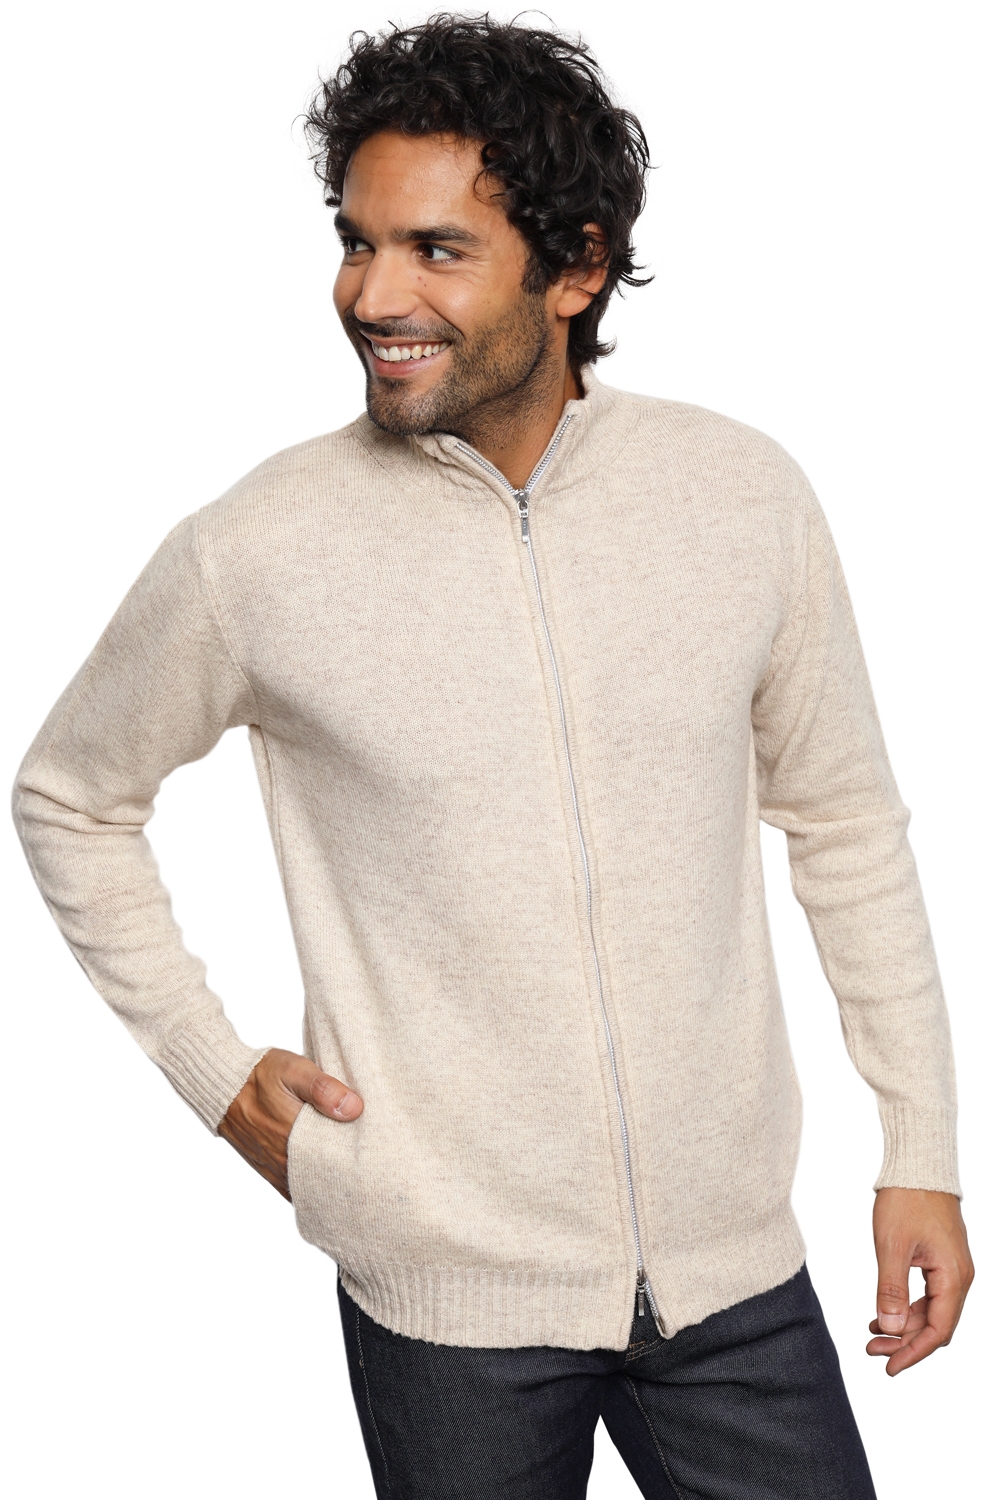 Chameau pull homme clyde nature 2xl